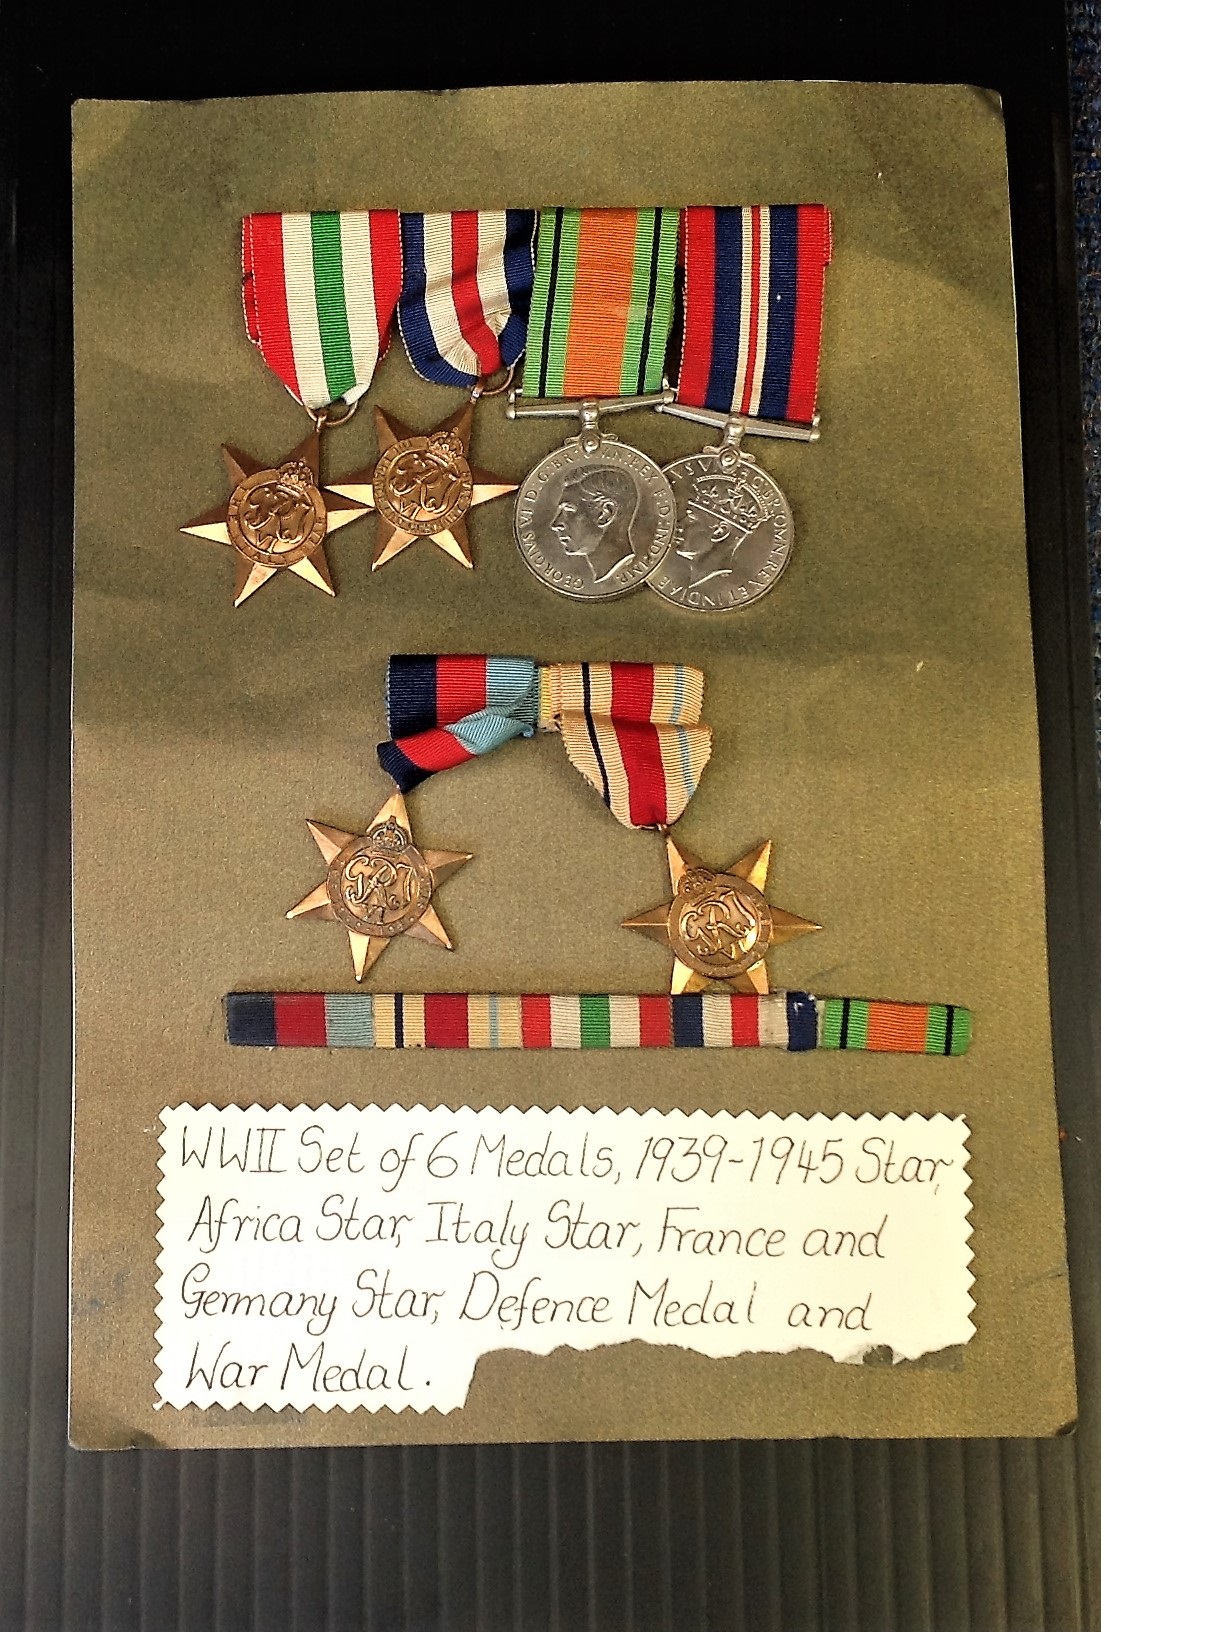 World War Two collection of 6 medals 1939-1945 includes Star Africa, Star Italy, Star France,